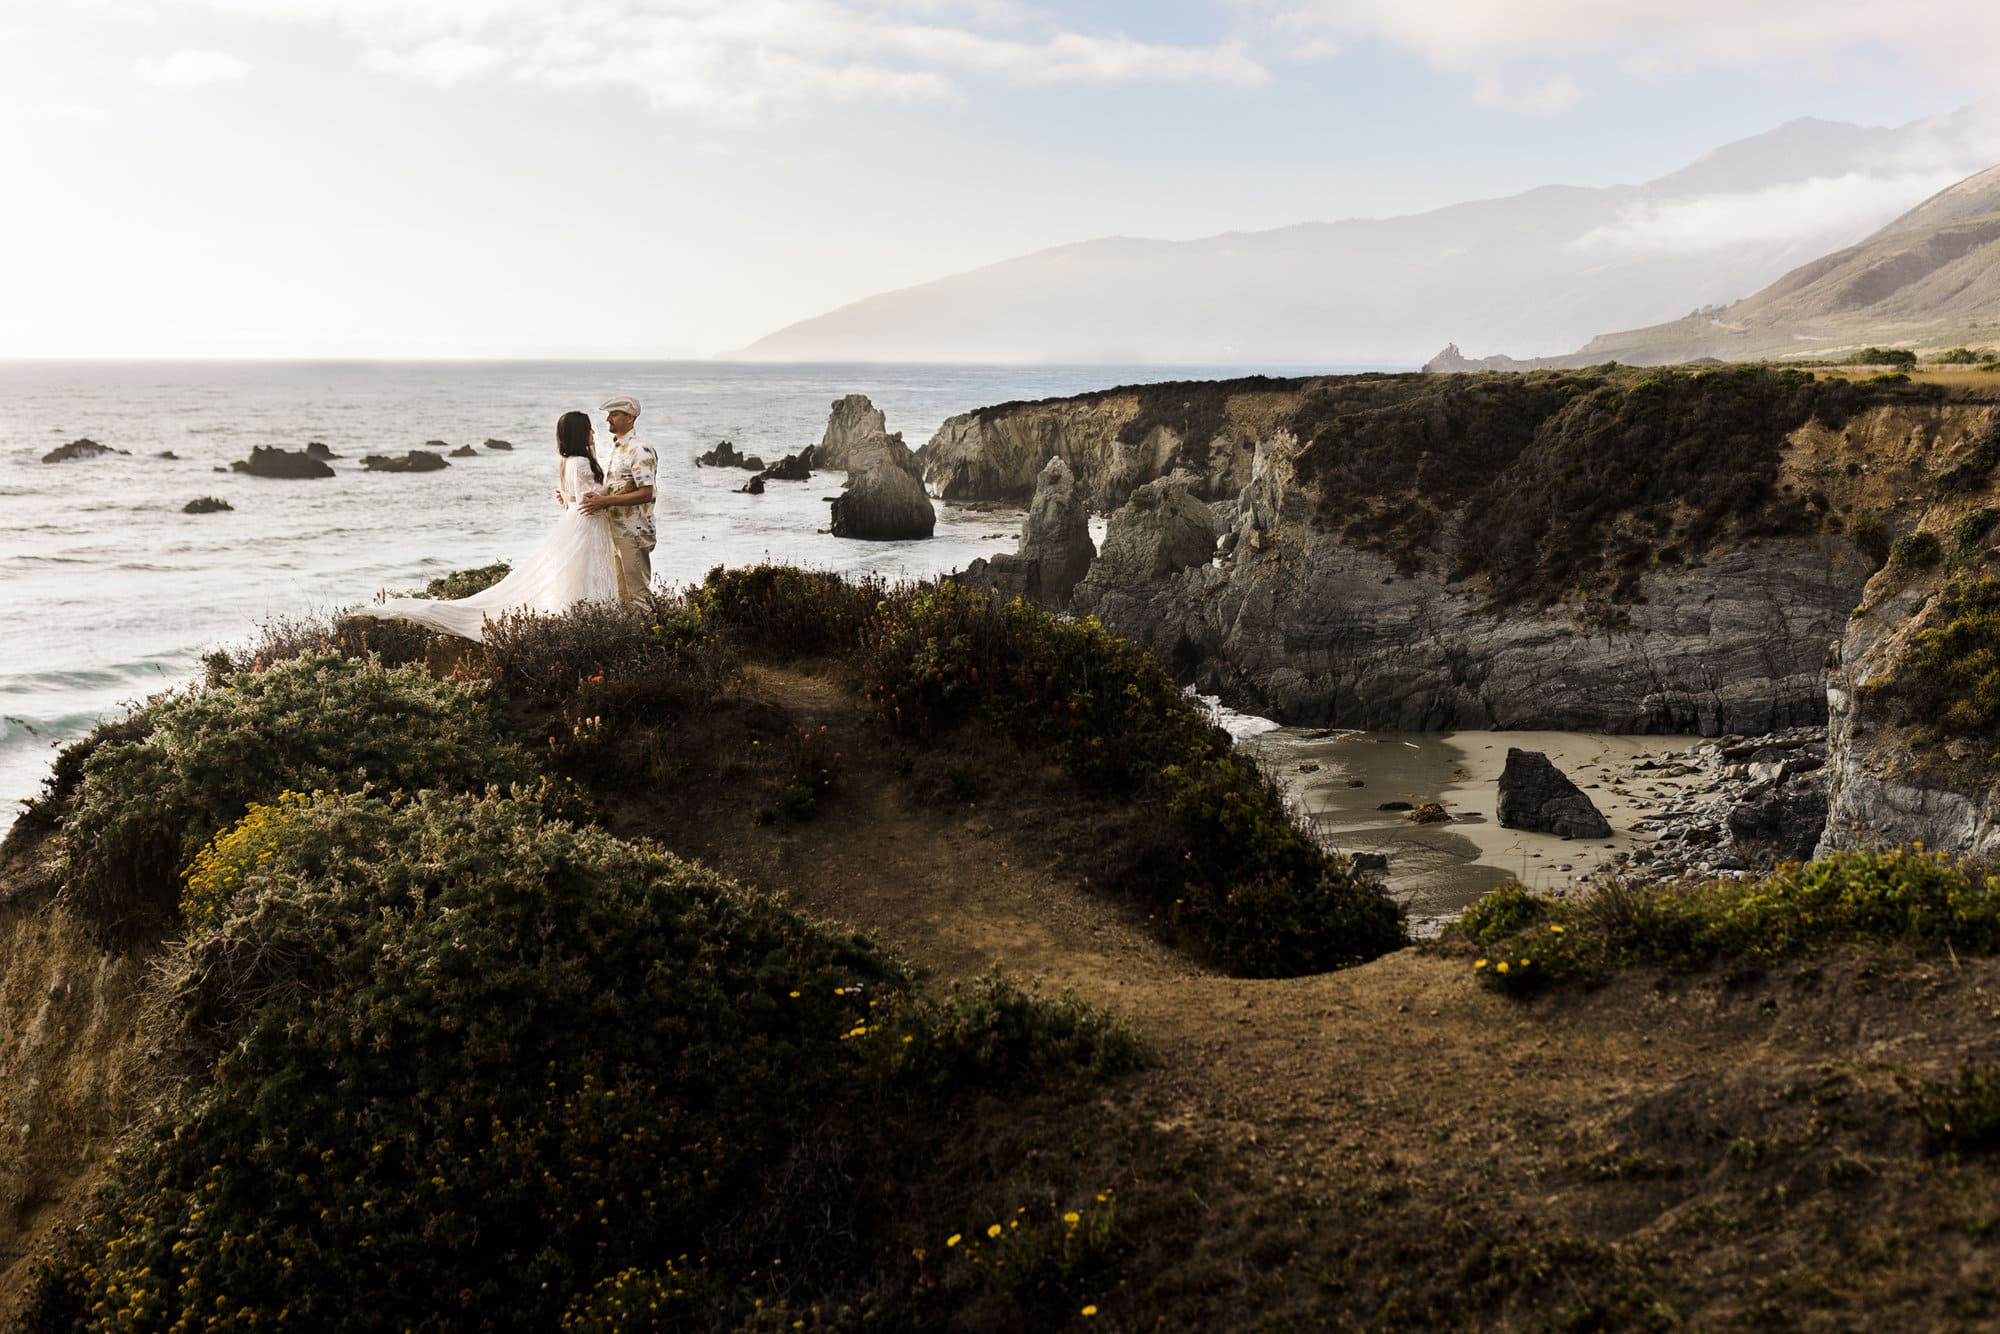 This two day Big Sur elopement is the epitome of romance and adventure. Full of coastal views and redwood trees, this elopement is one for the books